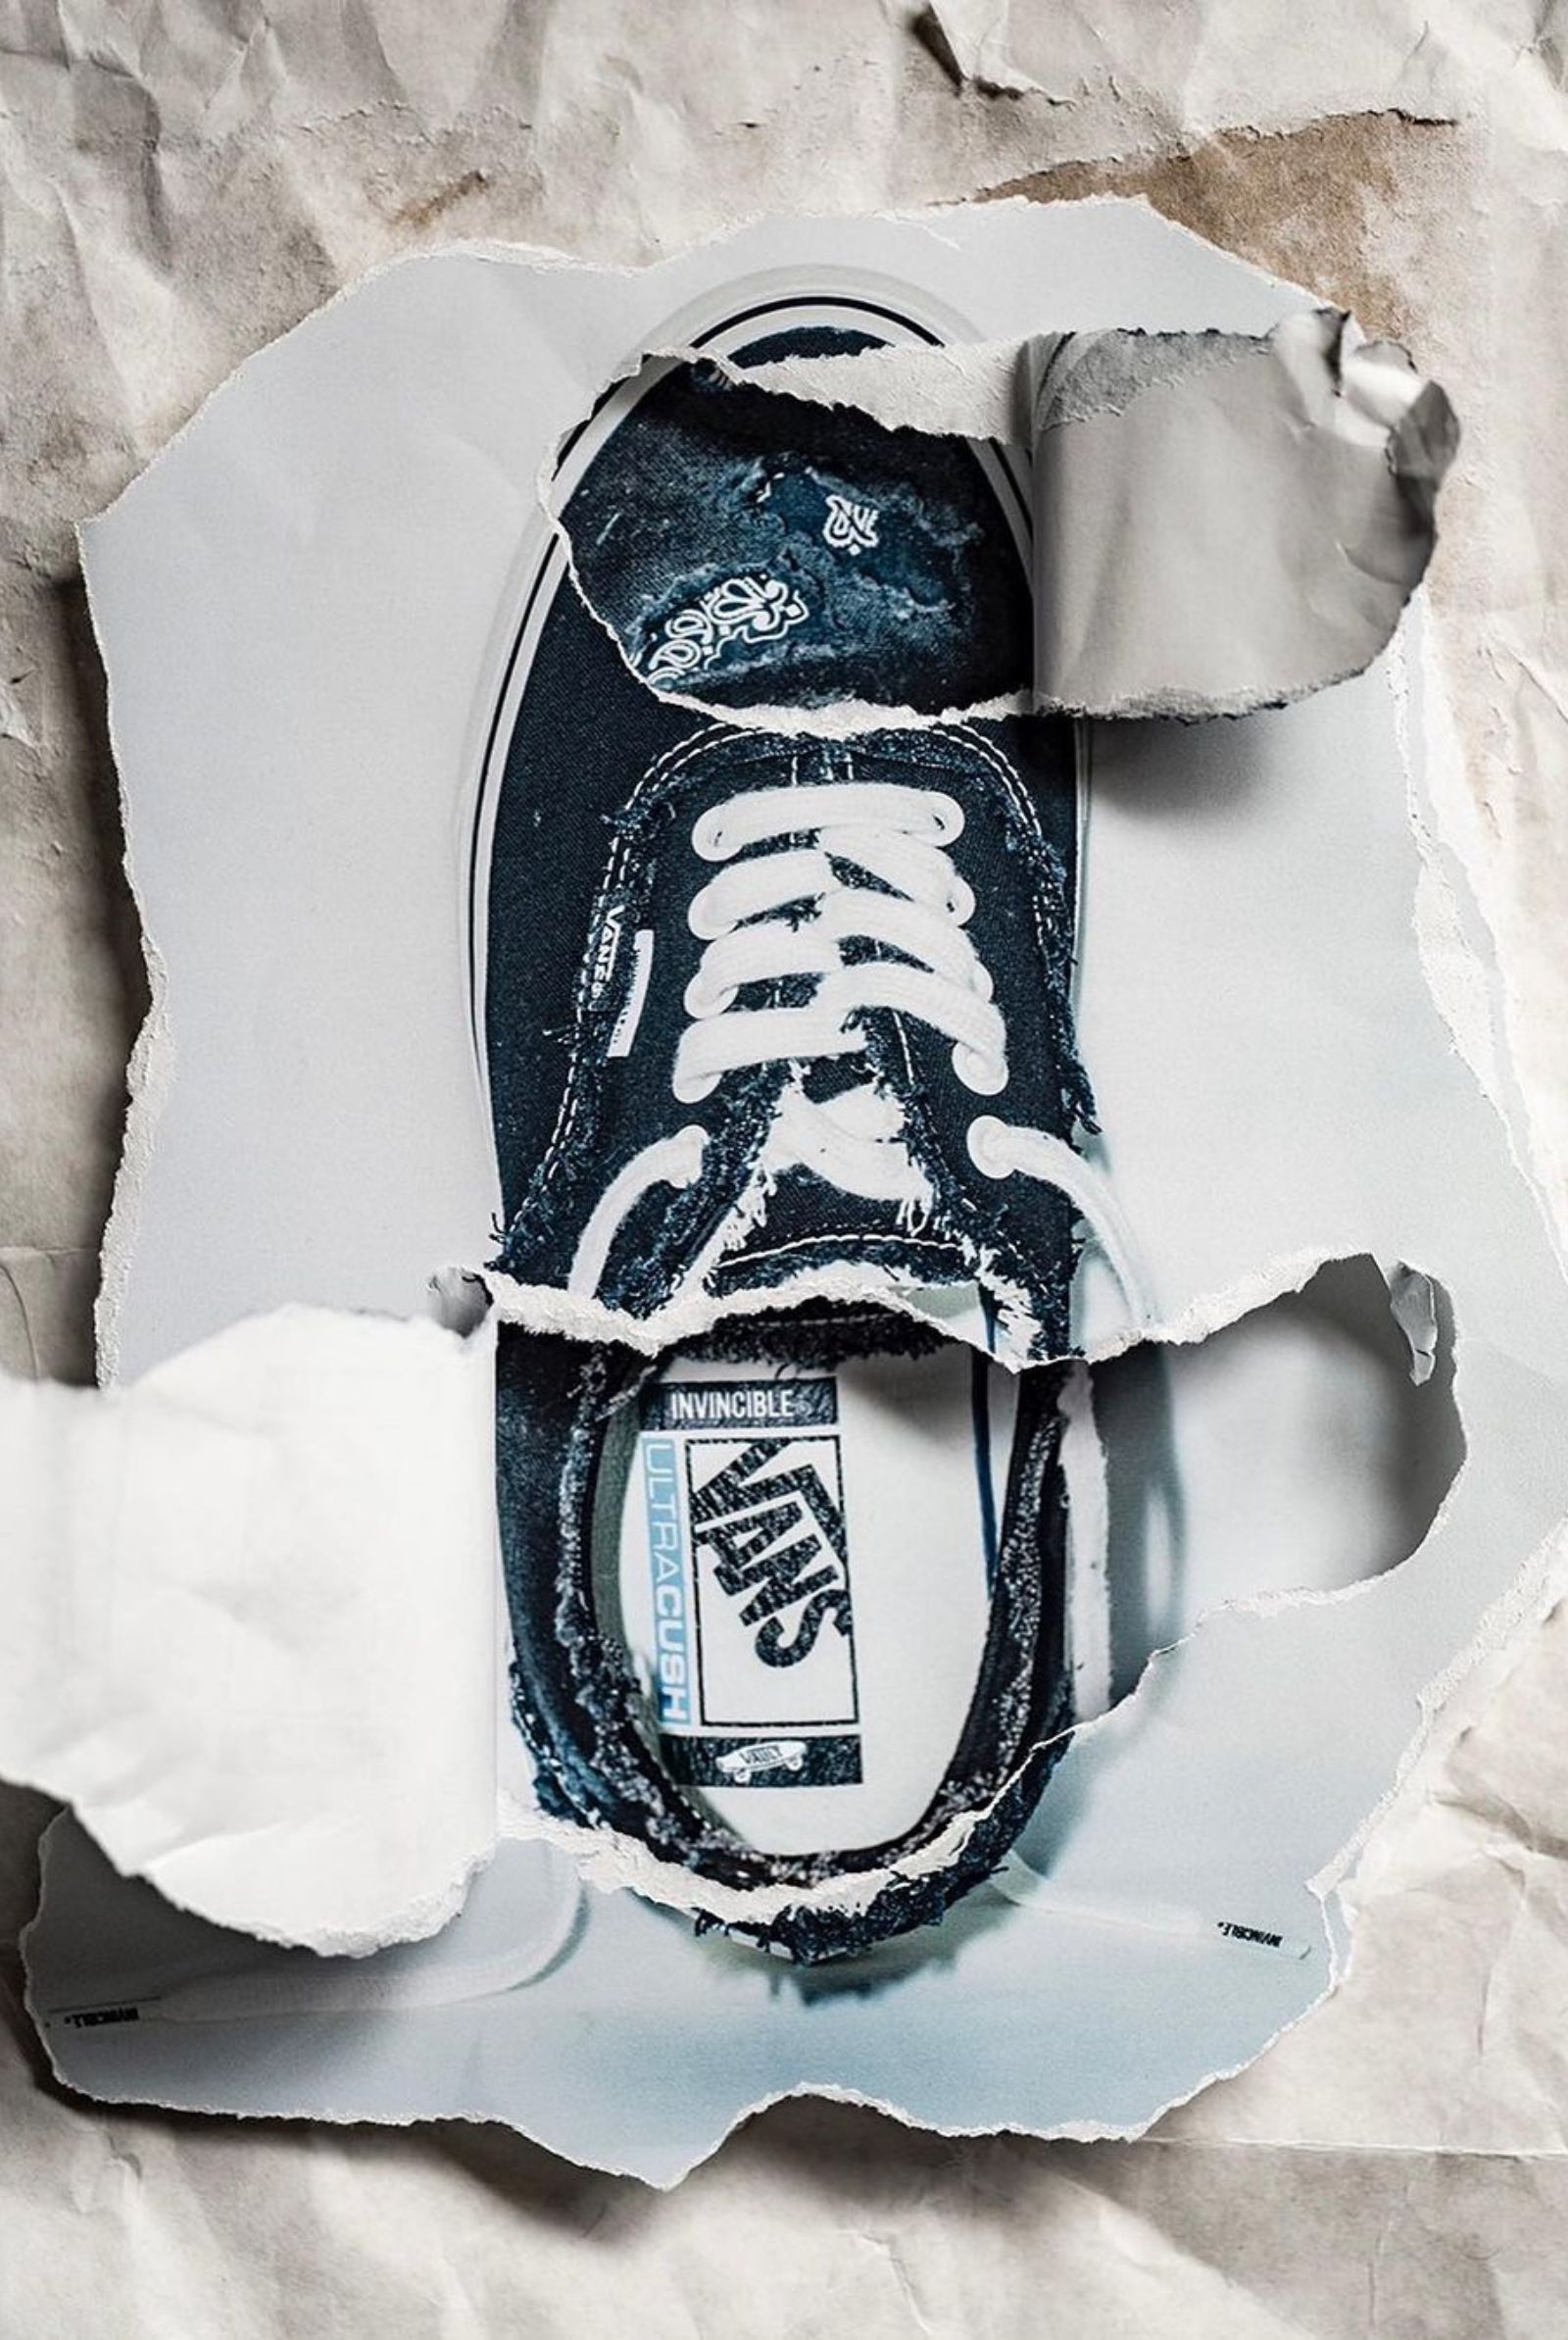 INVINCIBLE x Vault by Vans “Gnarly” Pack